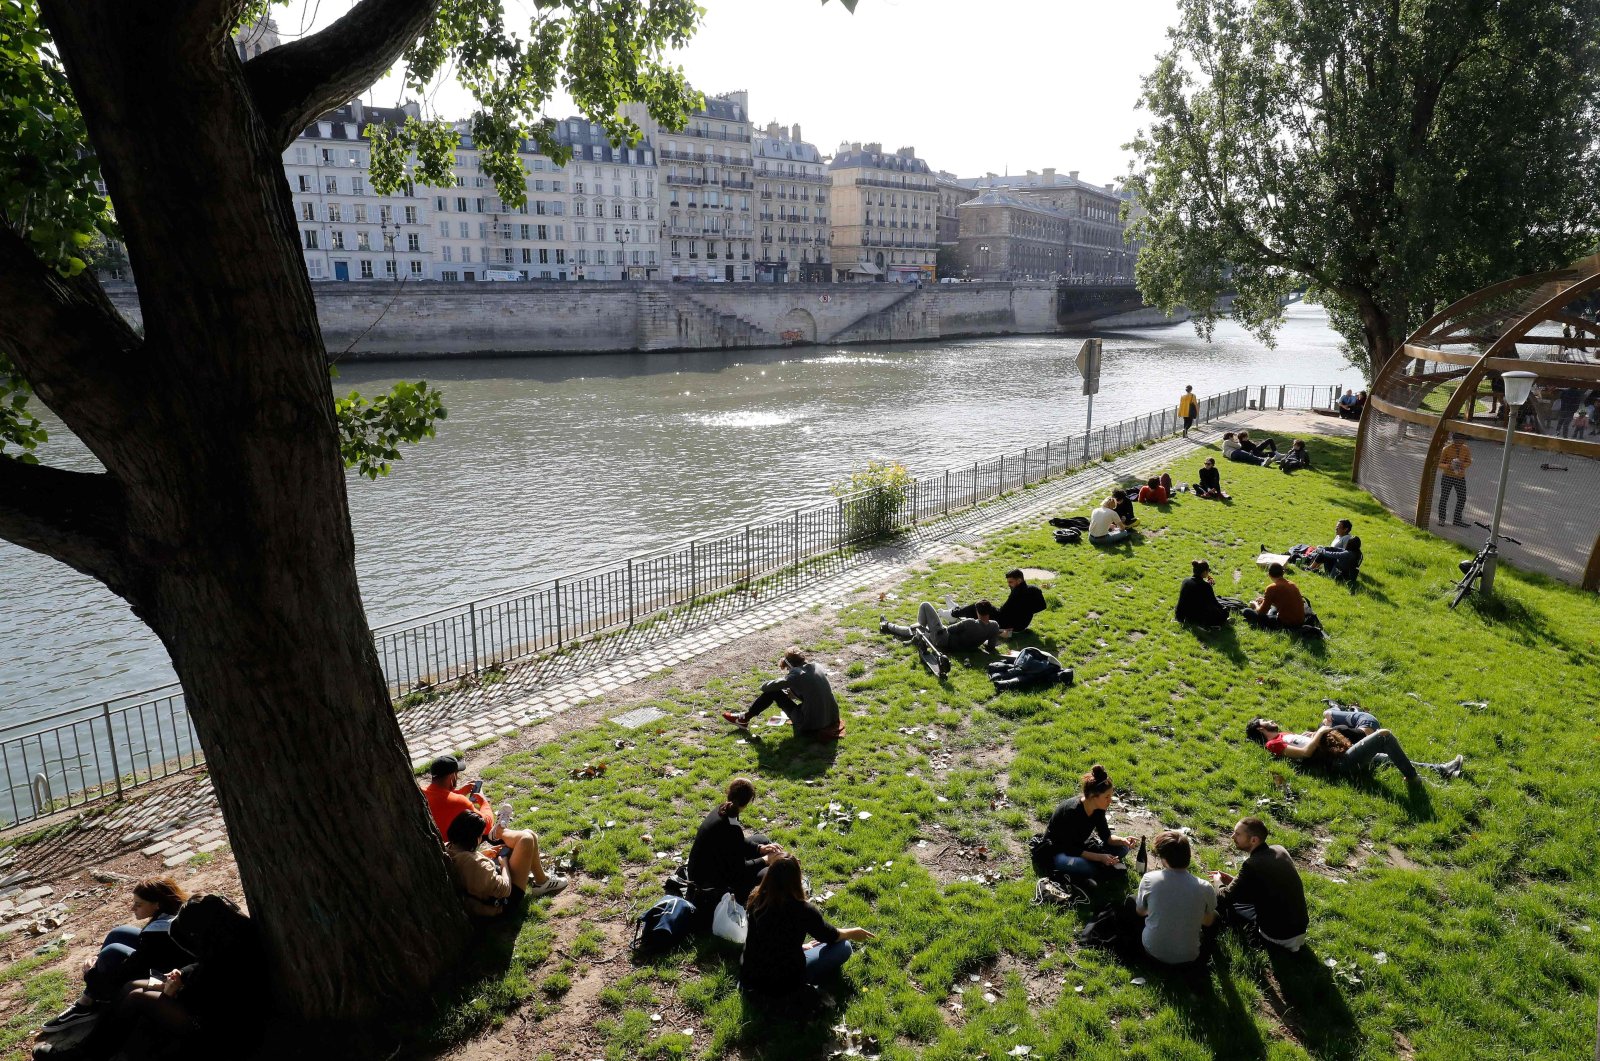 People gather along banks of the Seine river in Paris, on May 11, 2020, on the first day of France's easing of lockdown measures in place for 55 days to curb the spread of the COVID-19 pandemic, caused by the novel coronavirus. (AFP Photo)